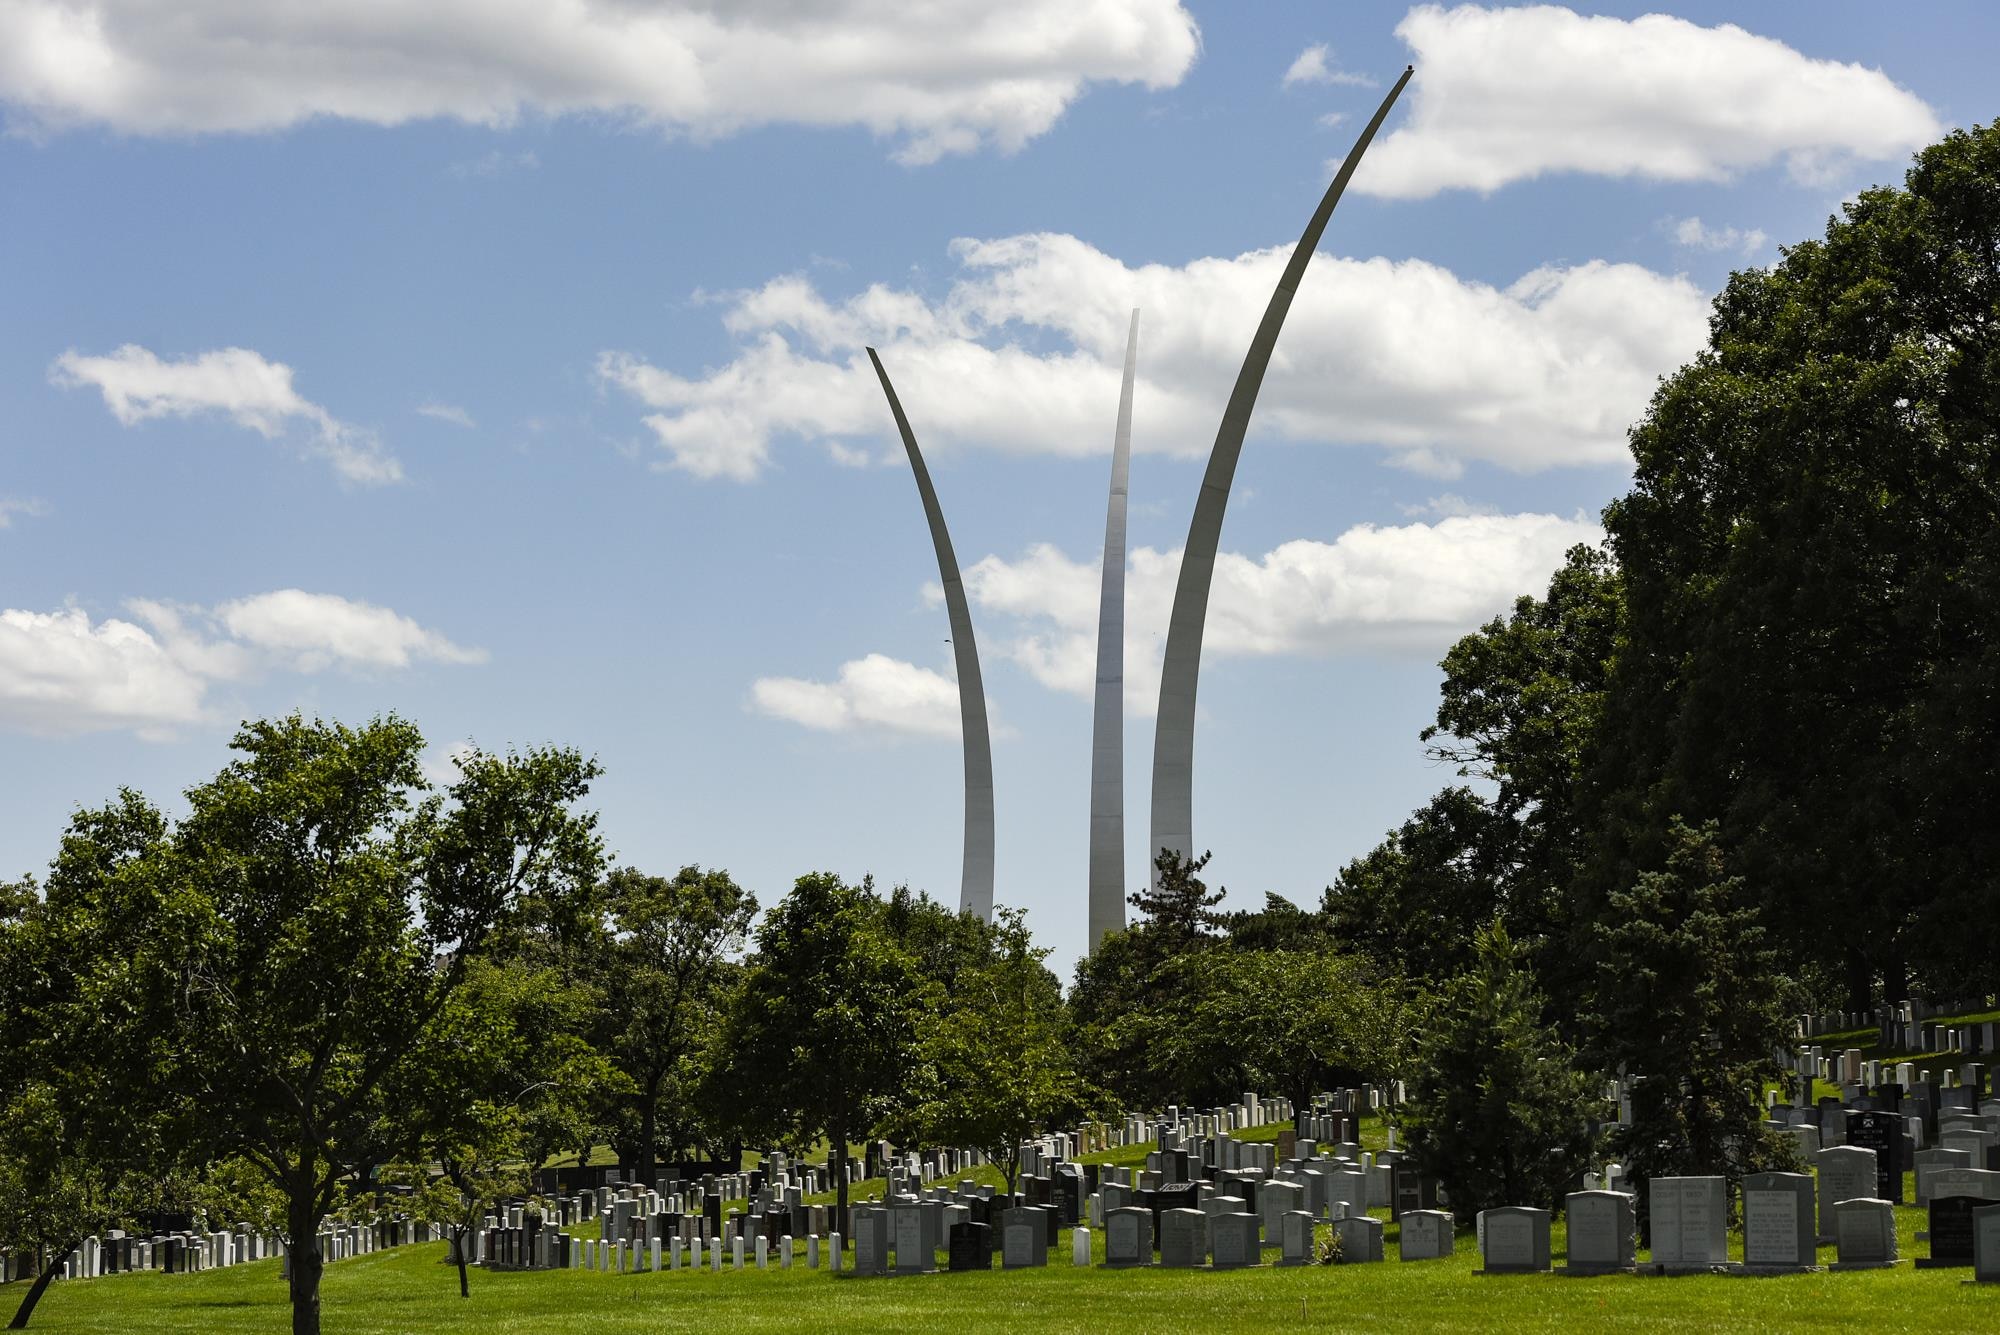 The Air Force Memorial is seen in the background as former 2nd Lt. Malvin G. Whitfield, 91, was laid to rest at Arlington National Cemetery, Va., June 8, 2016. In 1943, Whitfield enlisted in the Army Air Forces as a Tuskegee Airman, and later joined the Air Force Reserve as an officer. He died Nov. 19, 2015, at the age of 91. (U.S. Air Force photo/Staff Sgt. Alyssa C. Gibson)